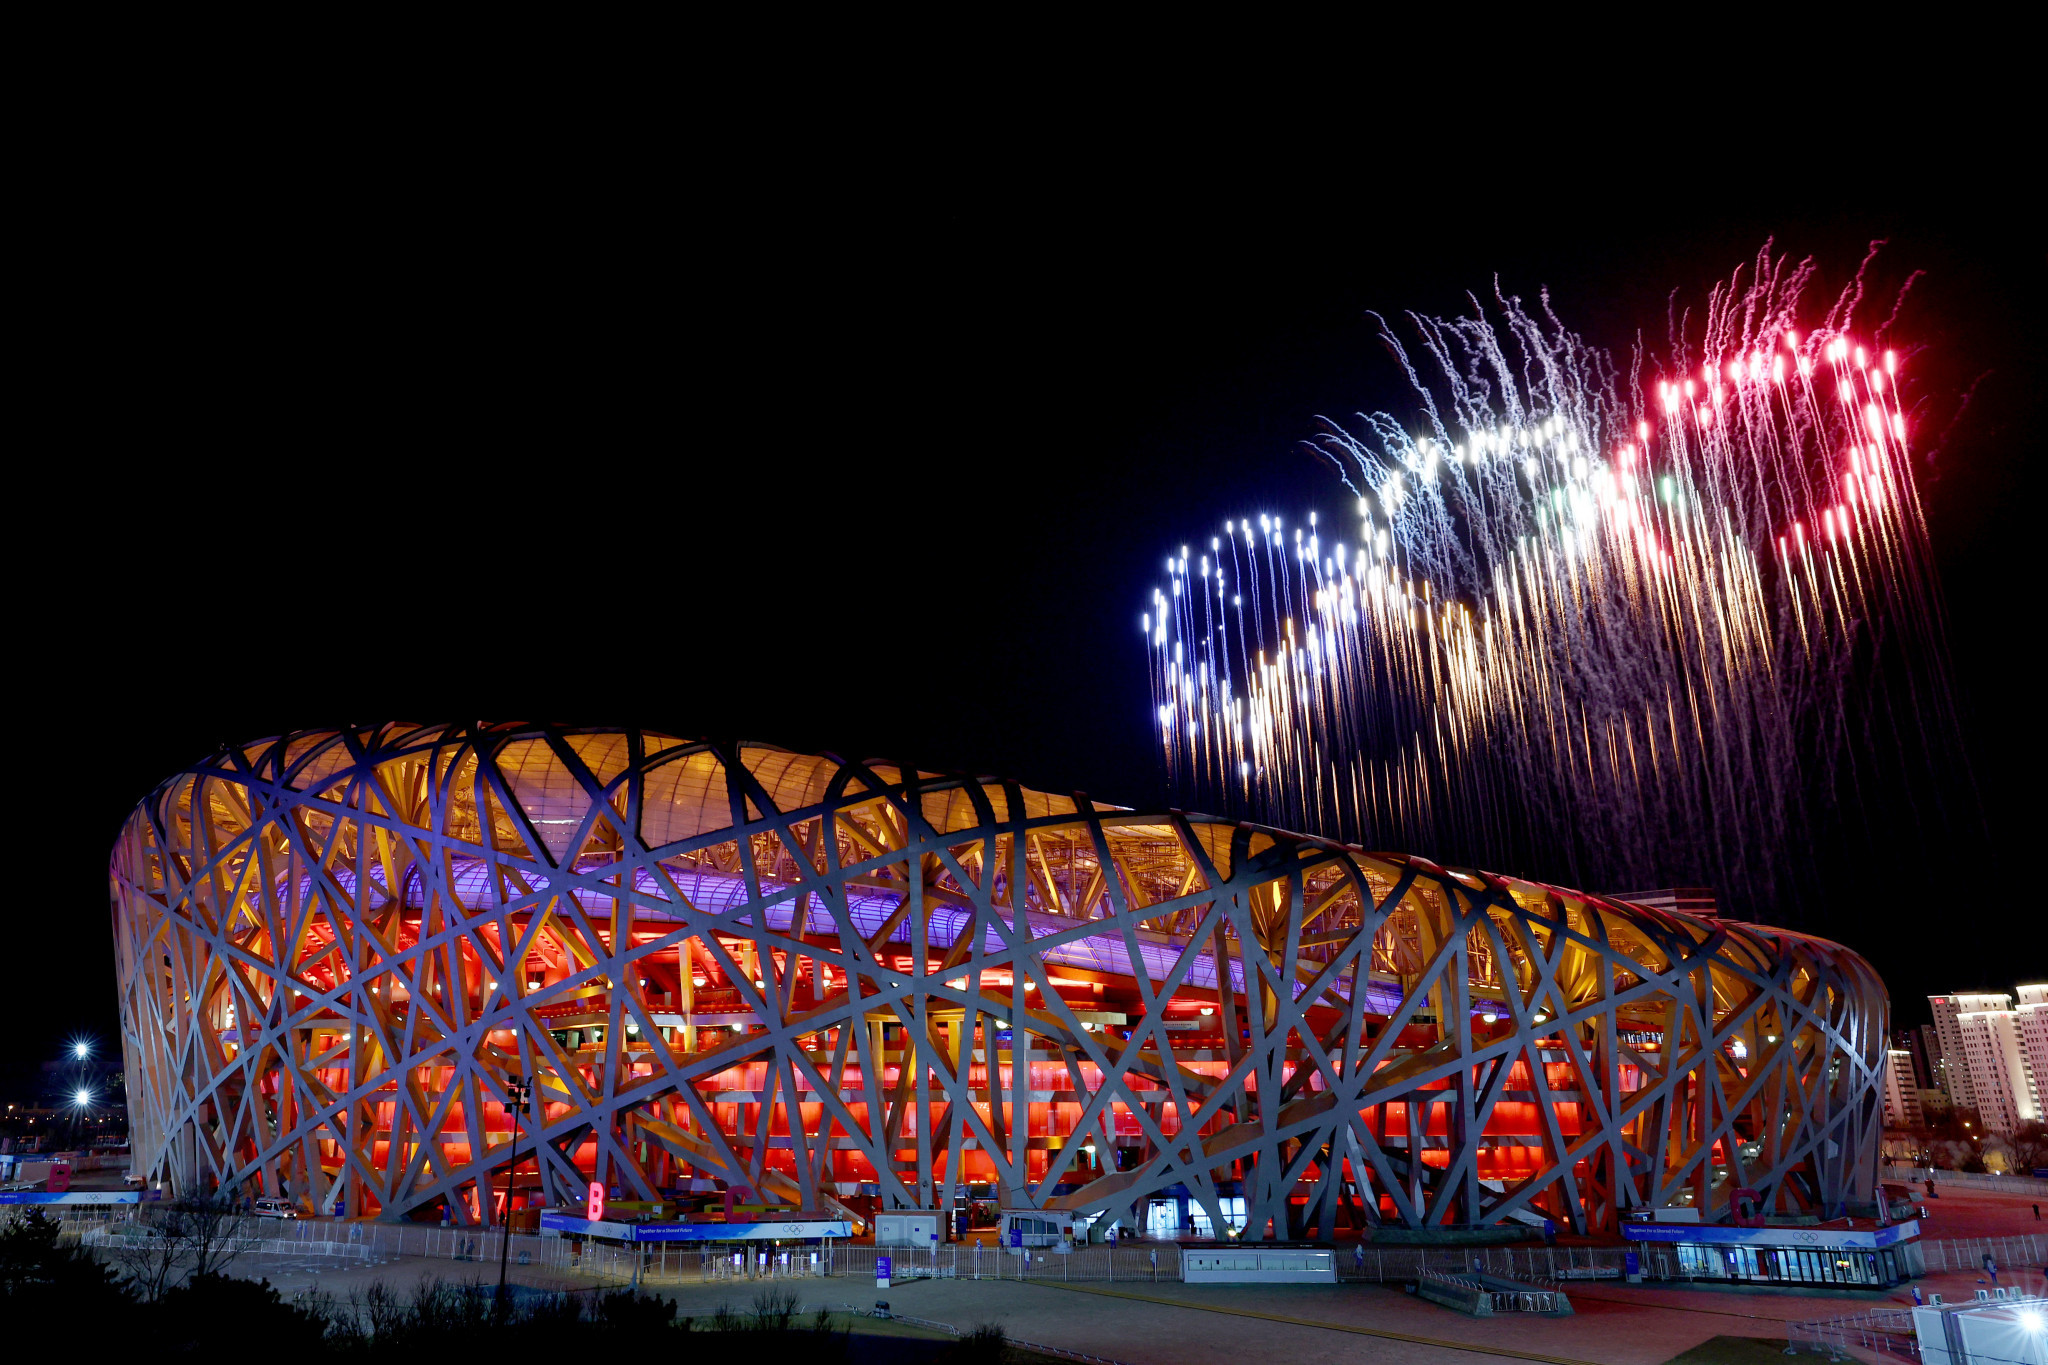 Beijing 2022 vows to continue "promoting the Olympic spirit" in final report